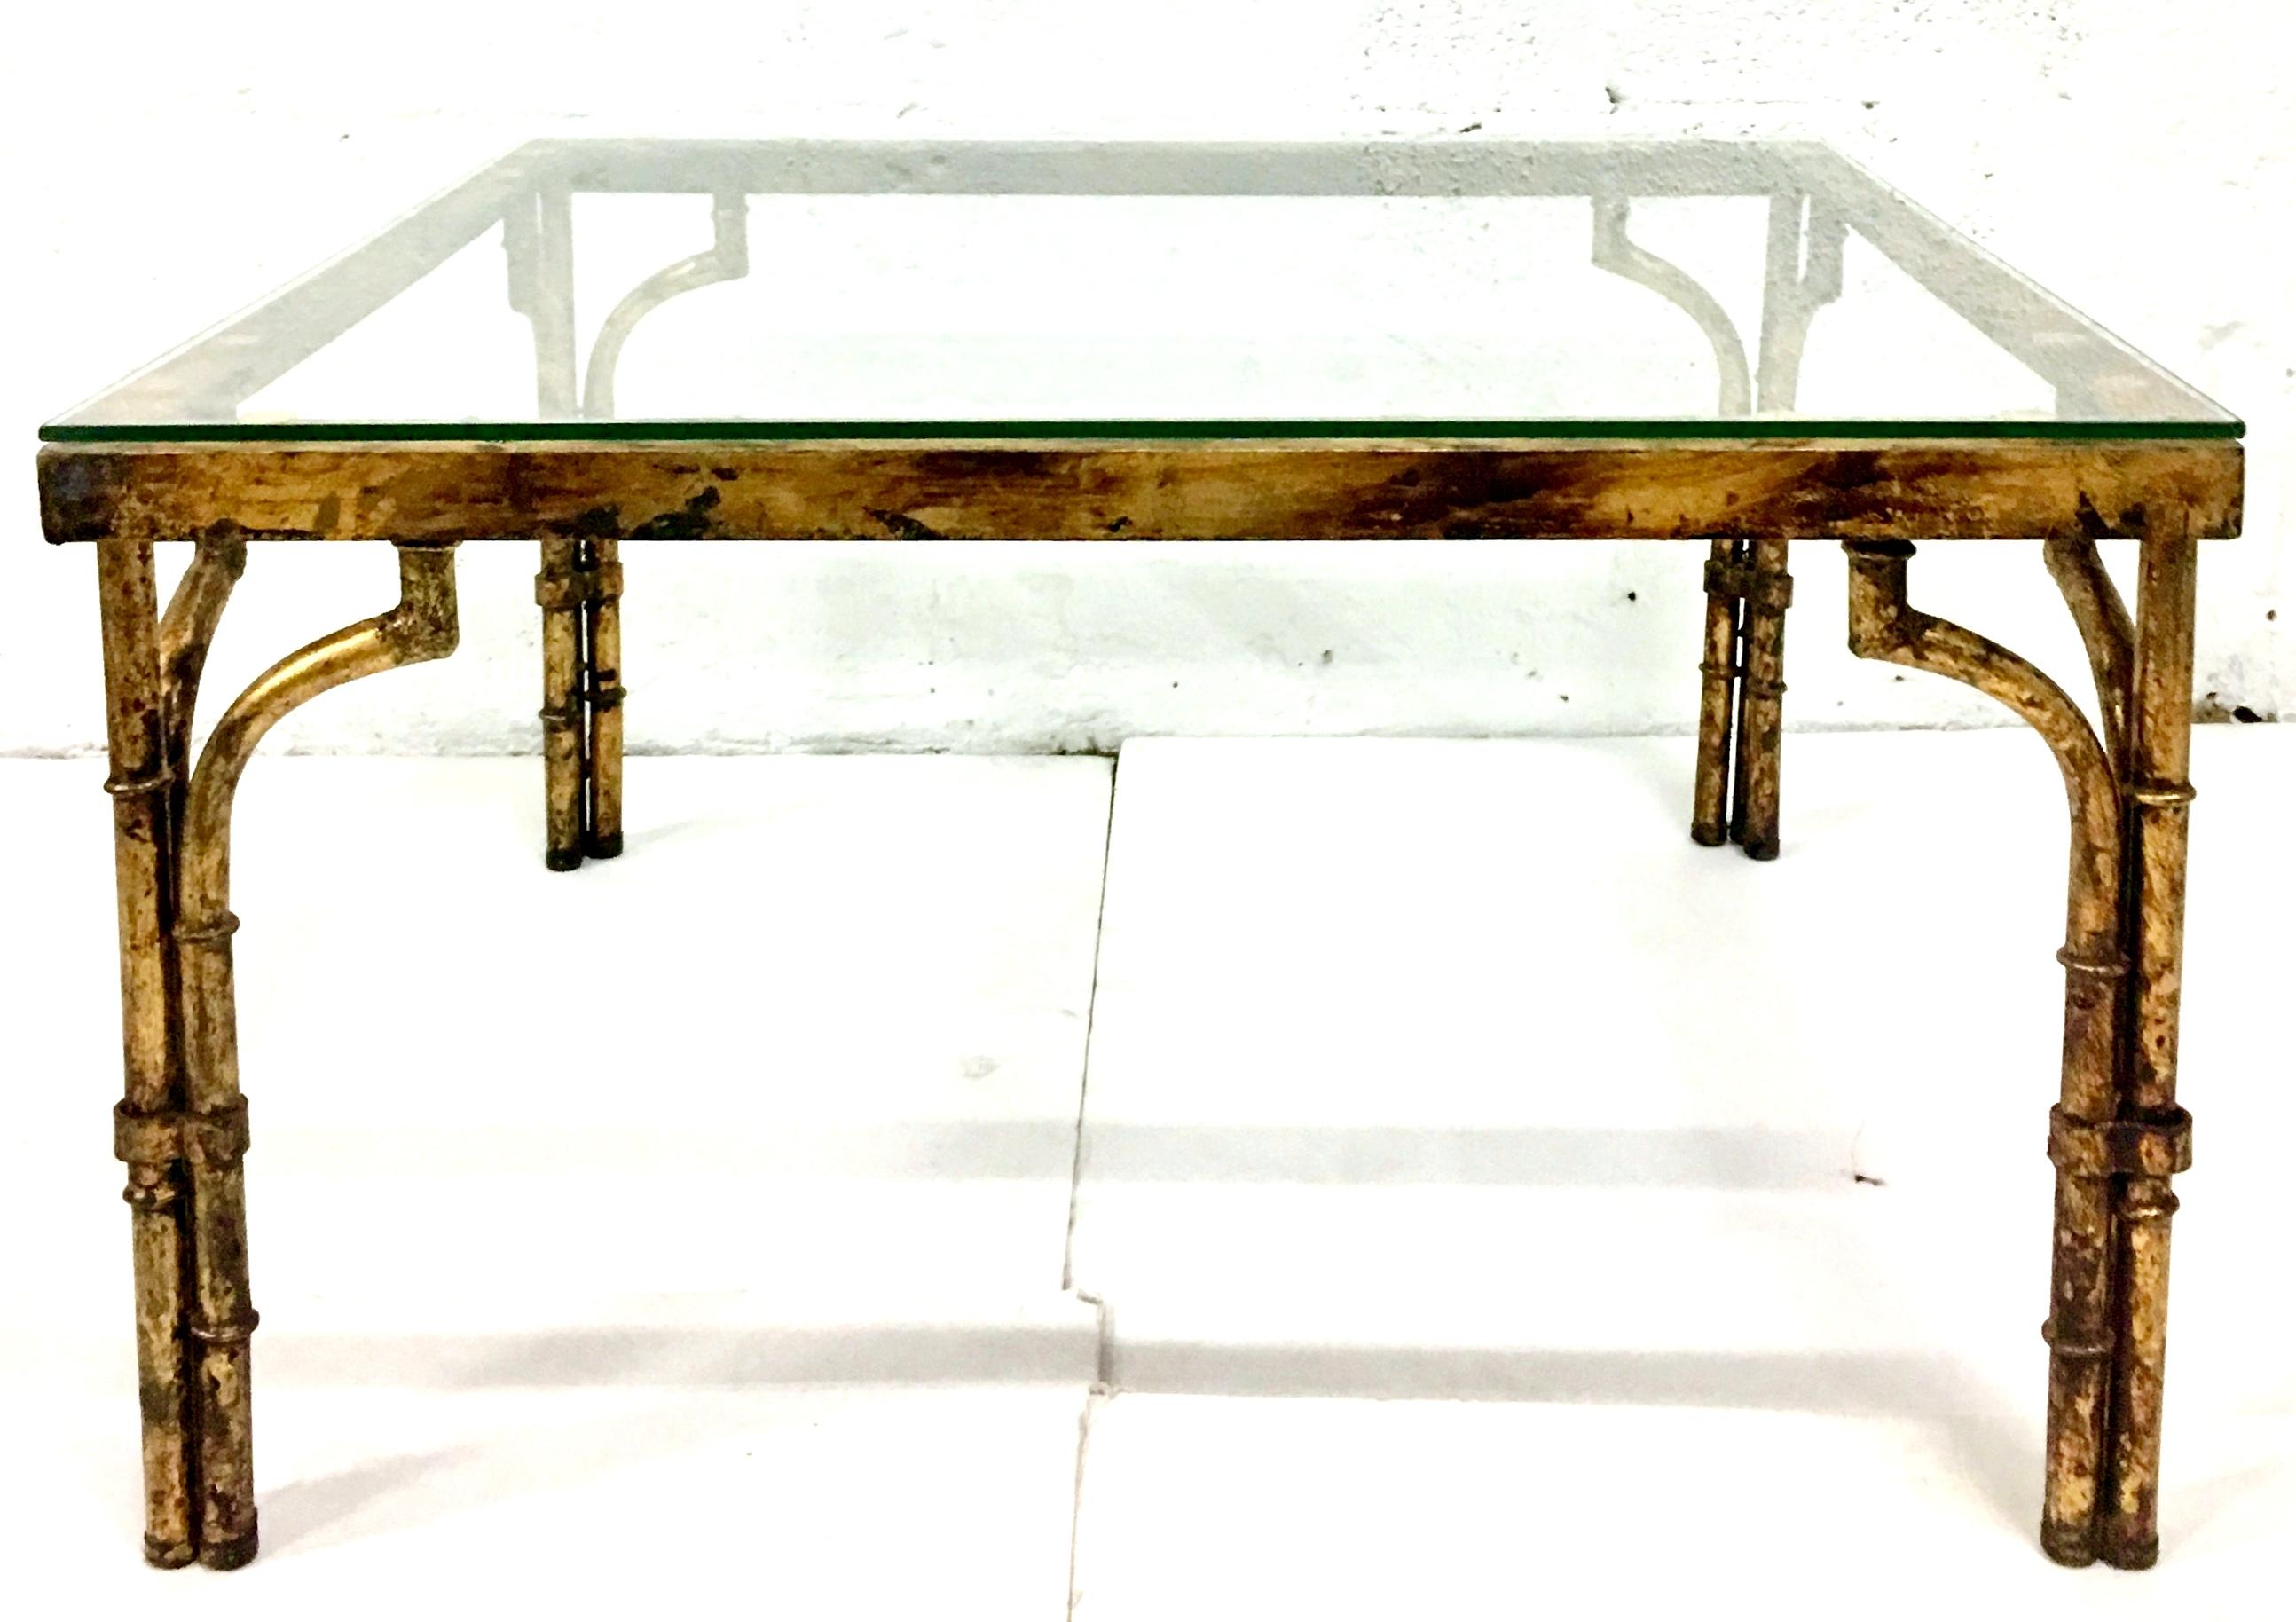 21st Century Contemporary & New faux bamboo aged gilt gold iron glass top coffee table.
Glass top is .25